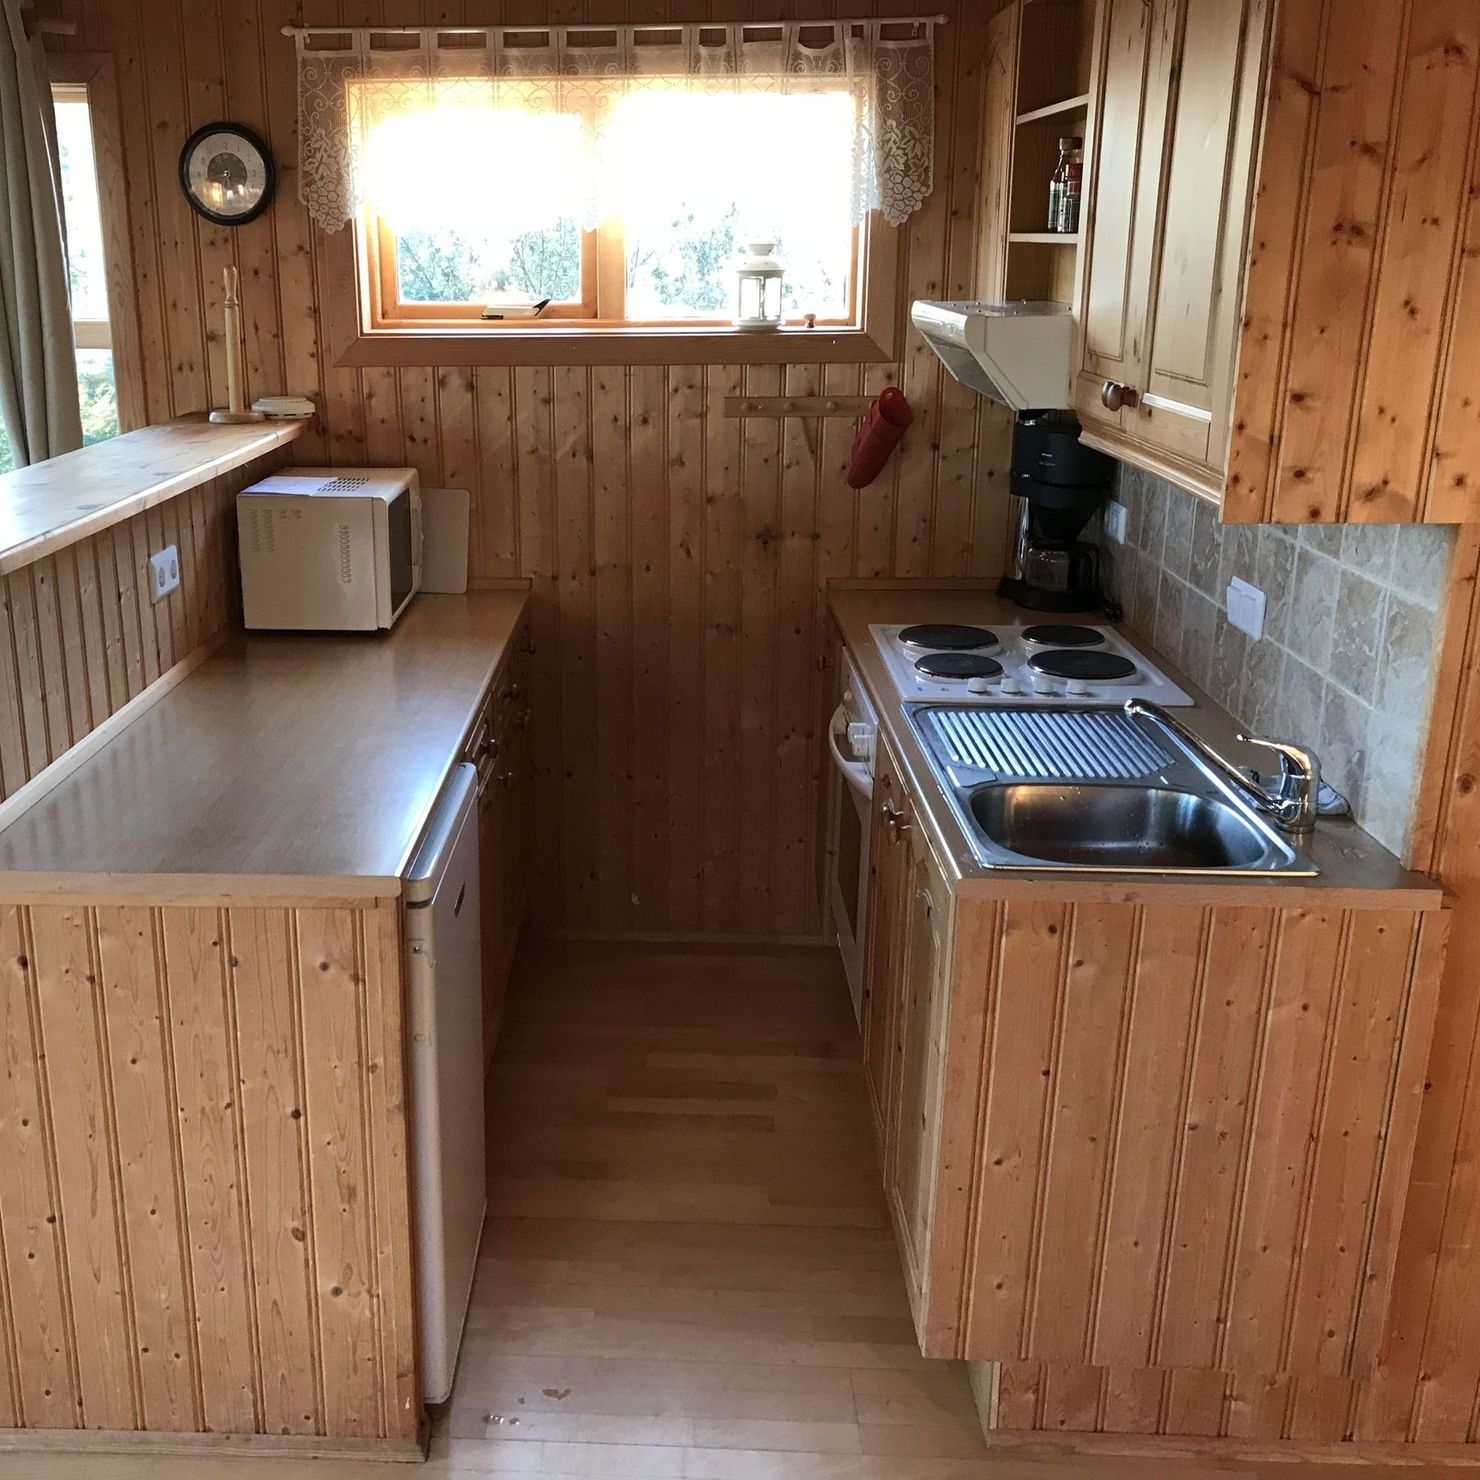 Kitchenette with stove and counter has enough space for cooking